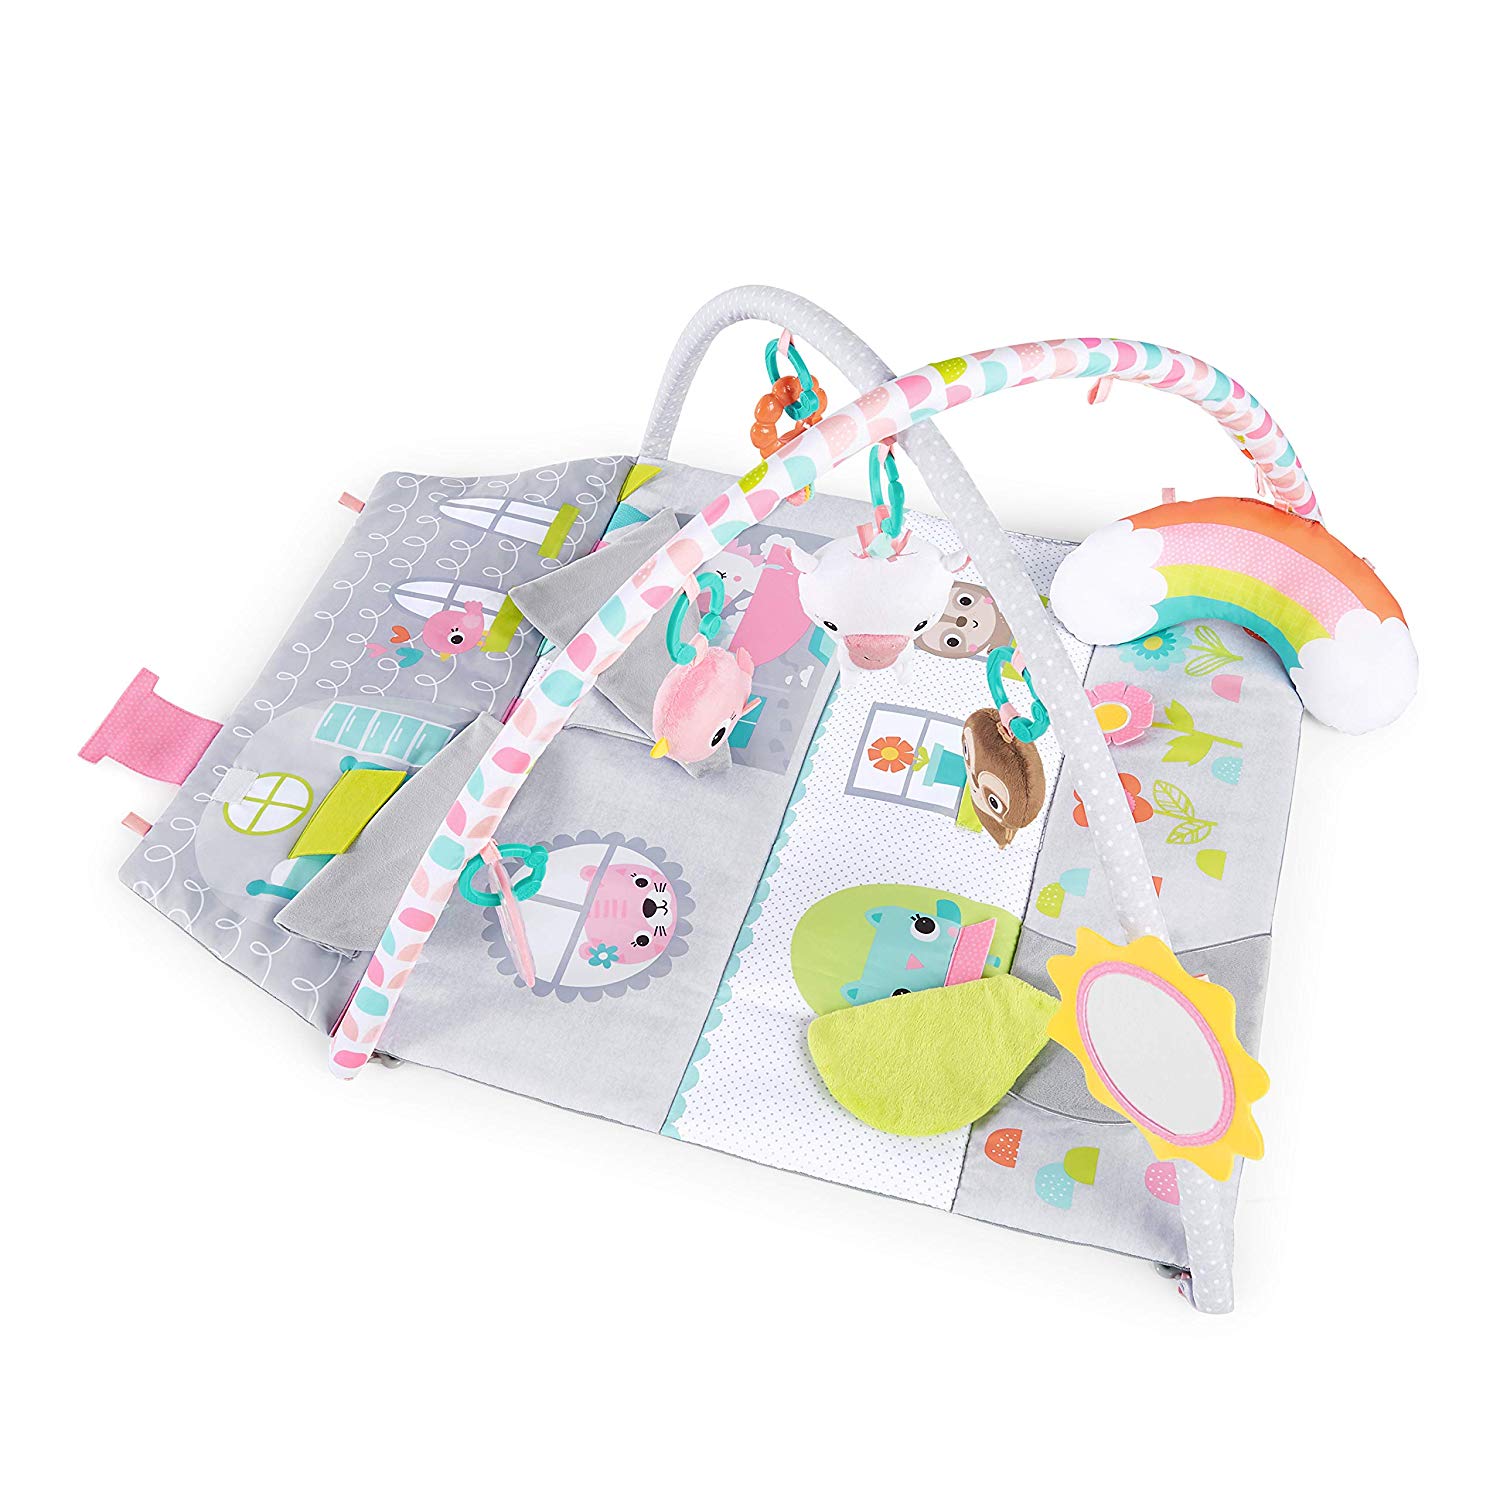 Bright Starts 2 in 1 Play Mat and Dolls House